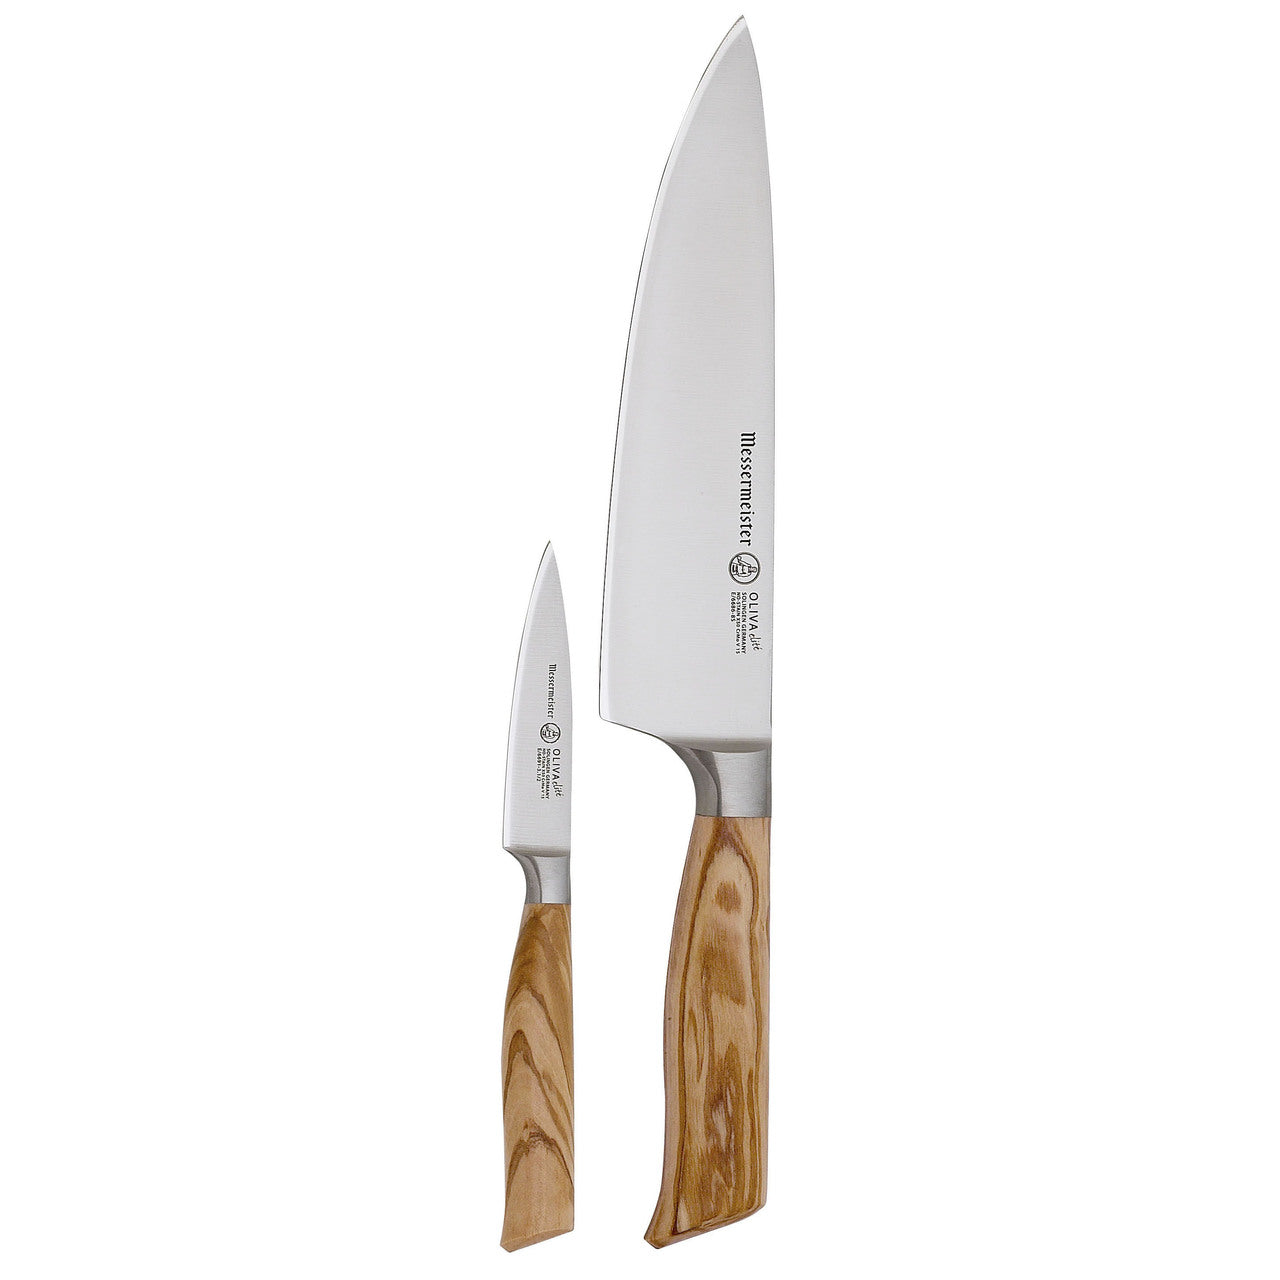 BEON.COM.AU Oliva Elité 2 Piece Chef &amp; Parer Set This two piece set consists of the Messermeister Oliva Elité 8 Inch Stealth Chef's Knife (E6686 8S) and Oliva Elité 3.5 Inch Spear Point Paring Knife (E6691-3). They are the two most widely used knives in the kitchen.  Features The German 1.4116 st... Messermeister at BEON.COM.AU